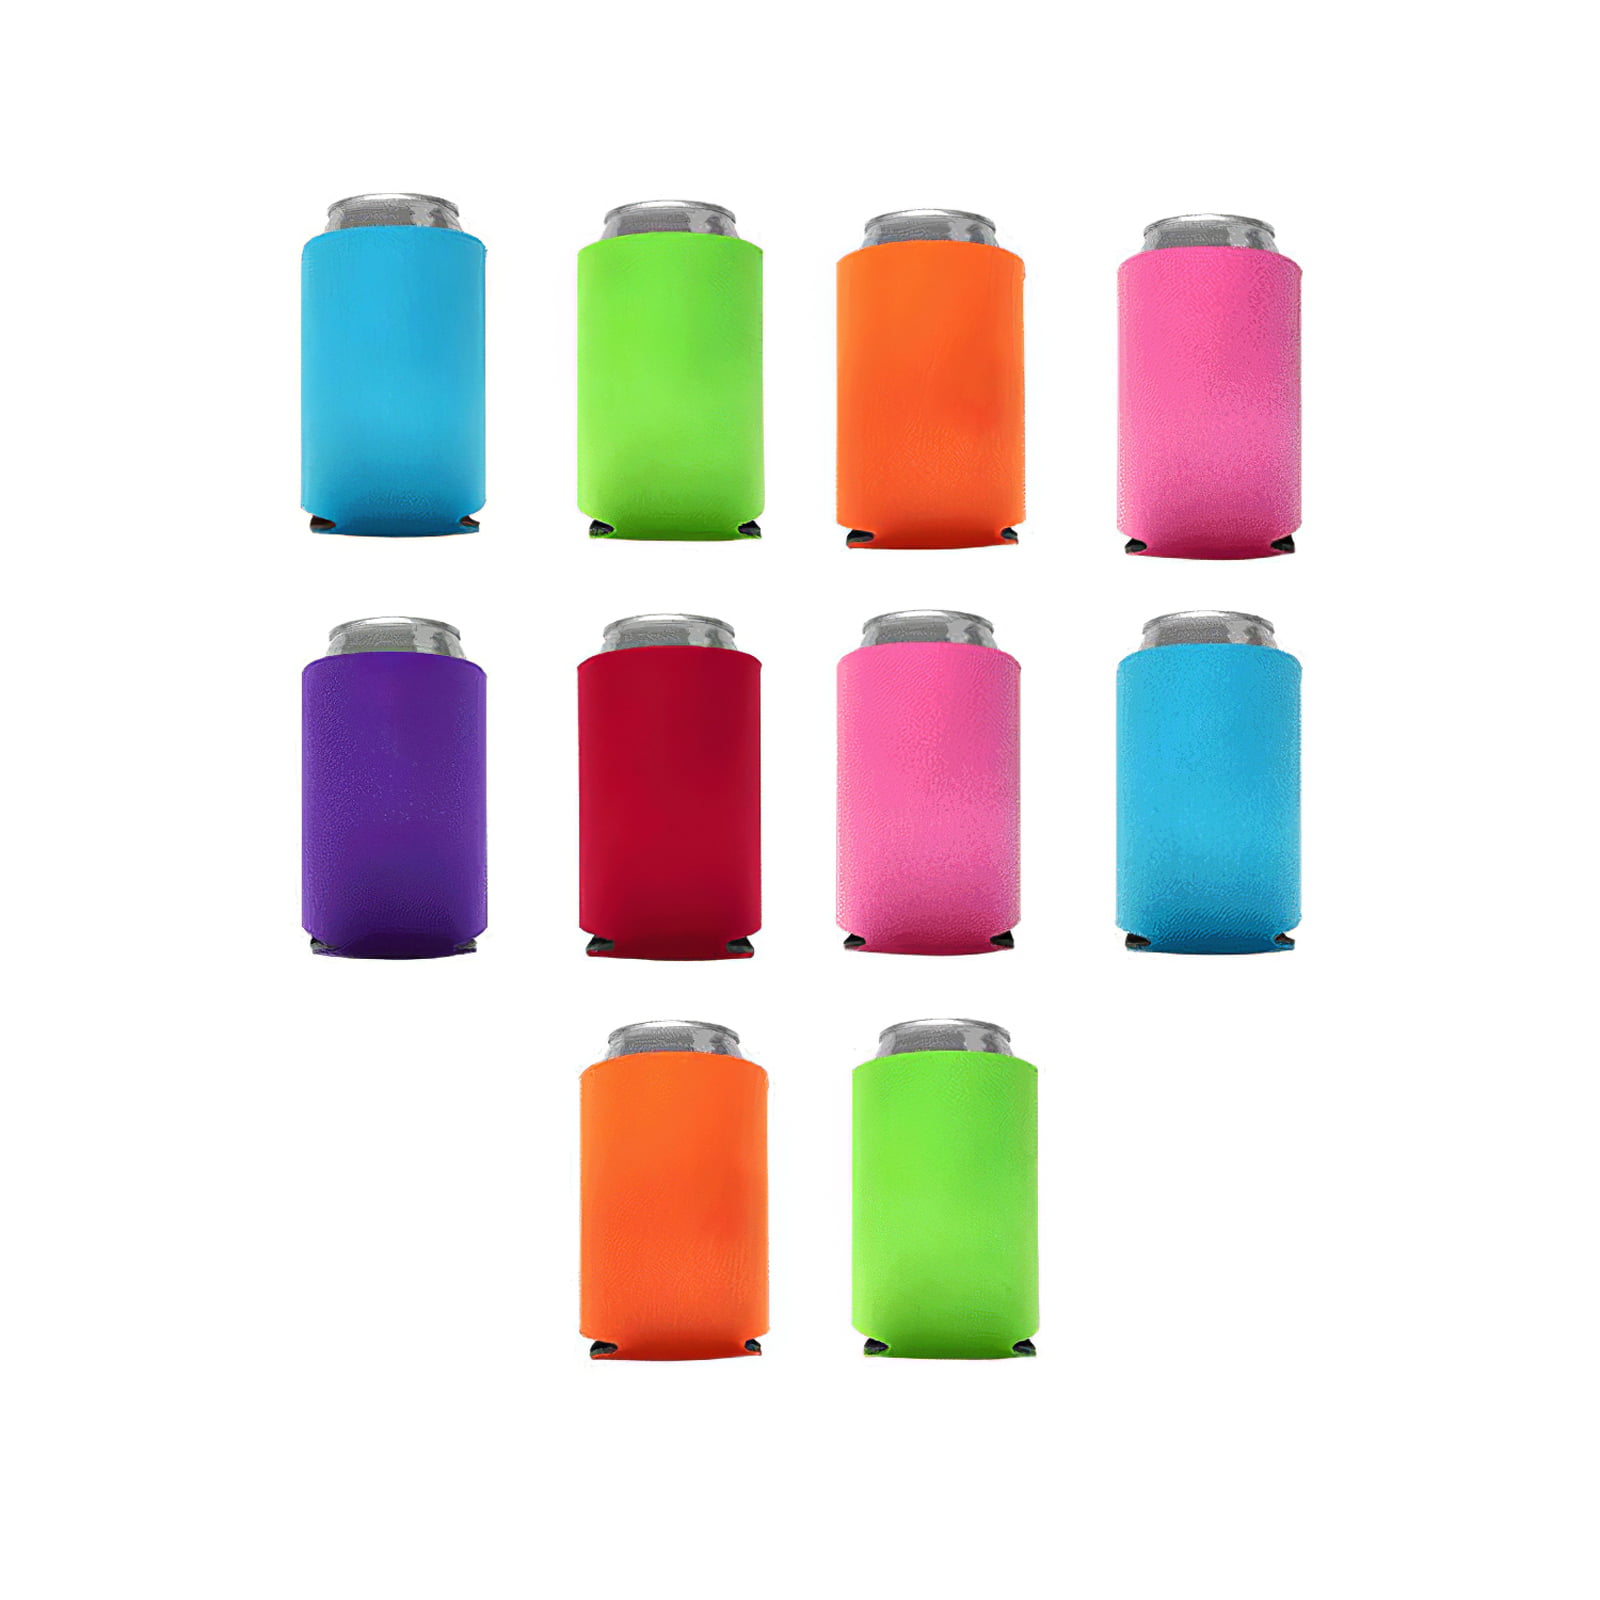 Protable Insulated Water Bottle Cup Drink Cooler Carrier Cover Case Random Color 